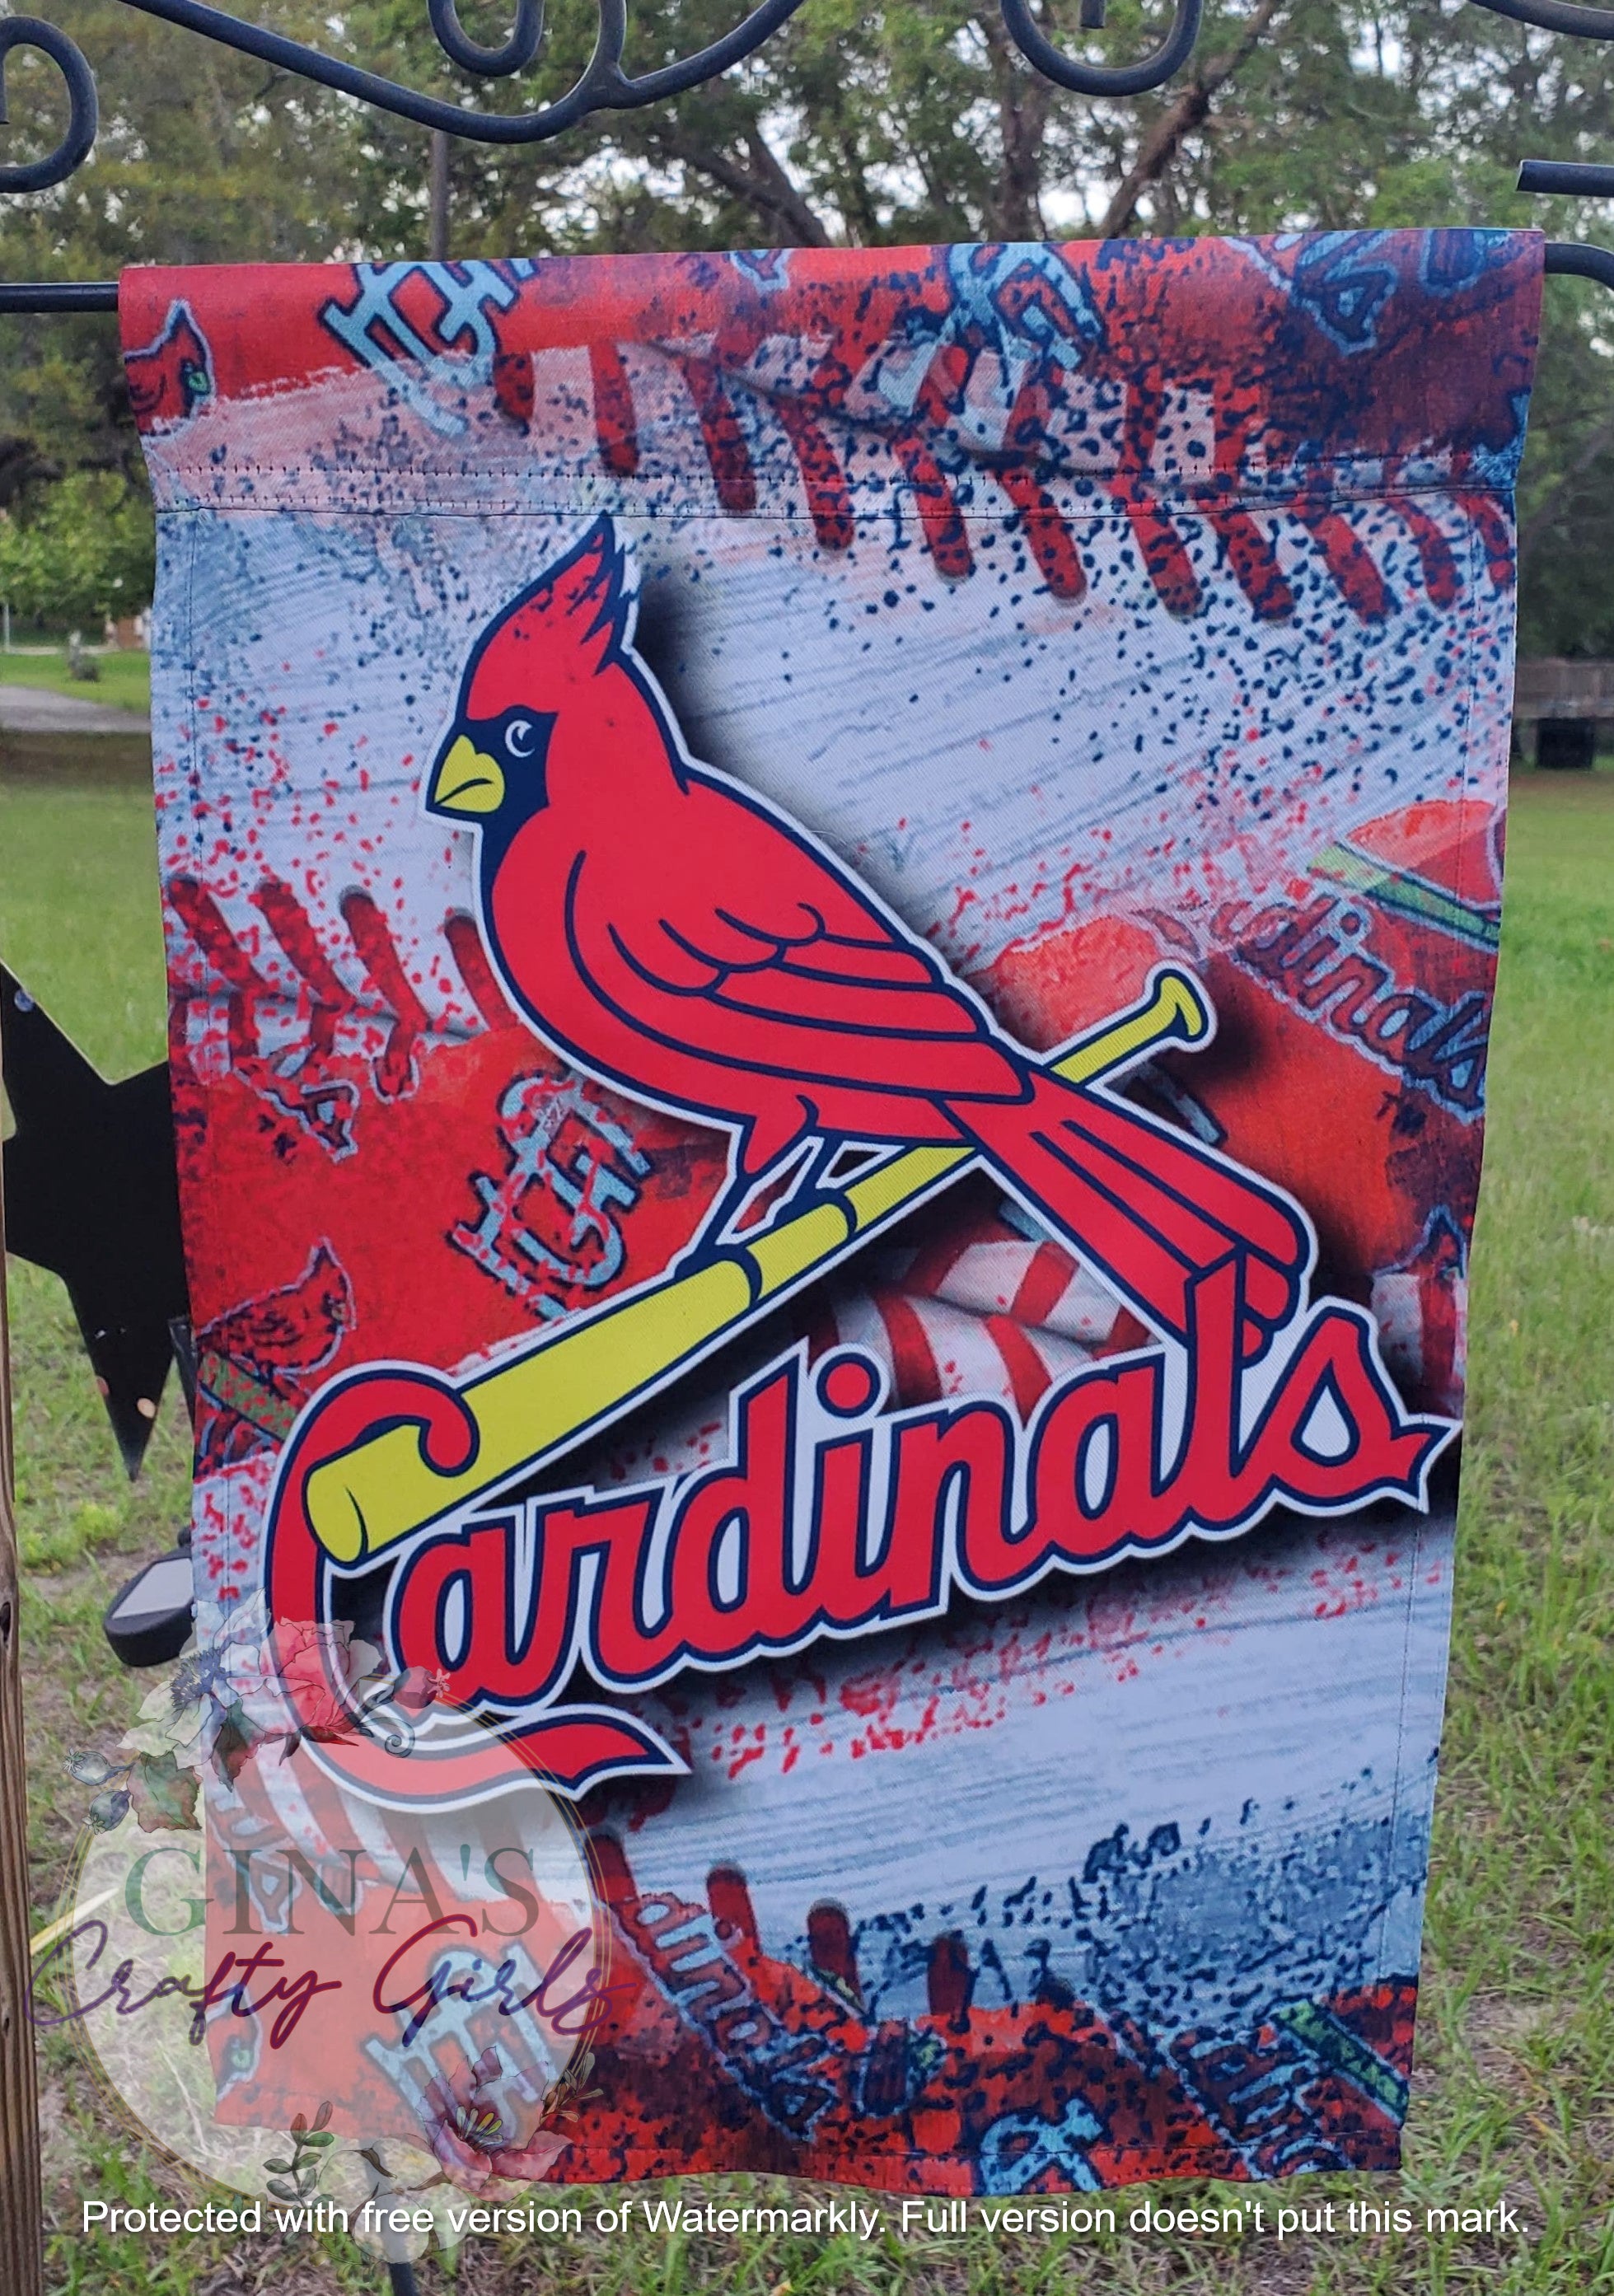 St Louis Cardinals USA Country Flag Metal Sign Baseball Signs Gift for Fans  - Custom Laser Cut Metal Art & Signs, Gift & Home Decor